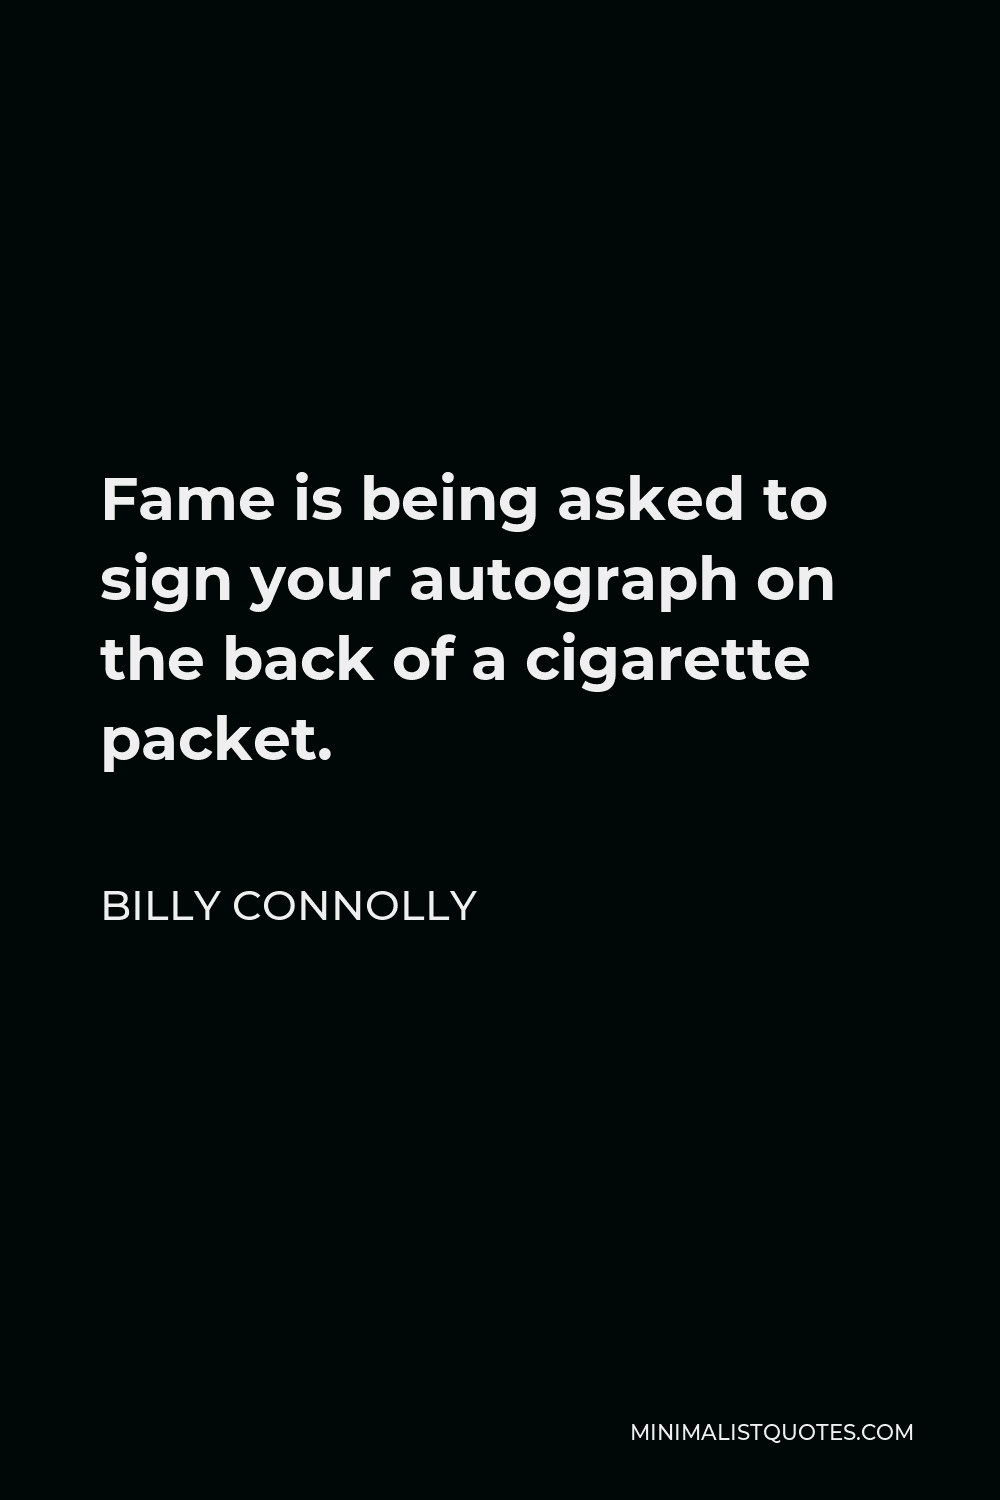 Billy Connolly Quote - Fame is being asked to sign your autograph on the back of a cigarette packet.